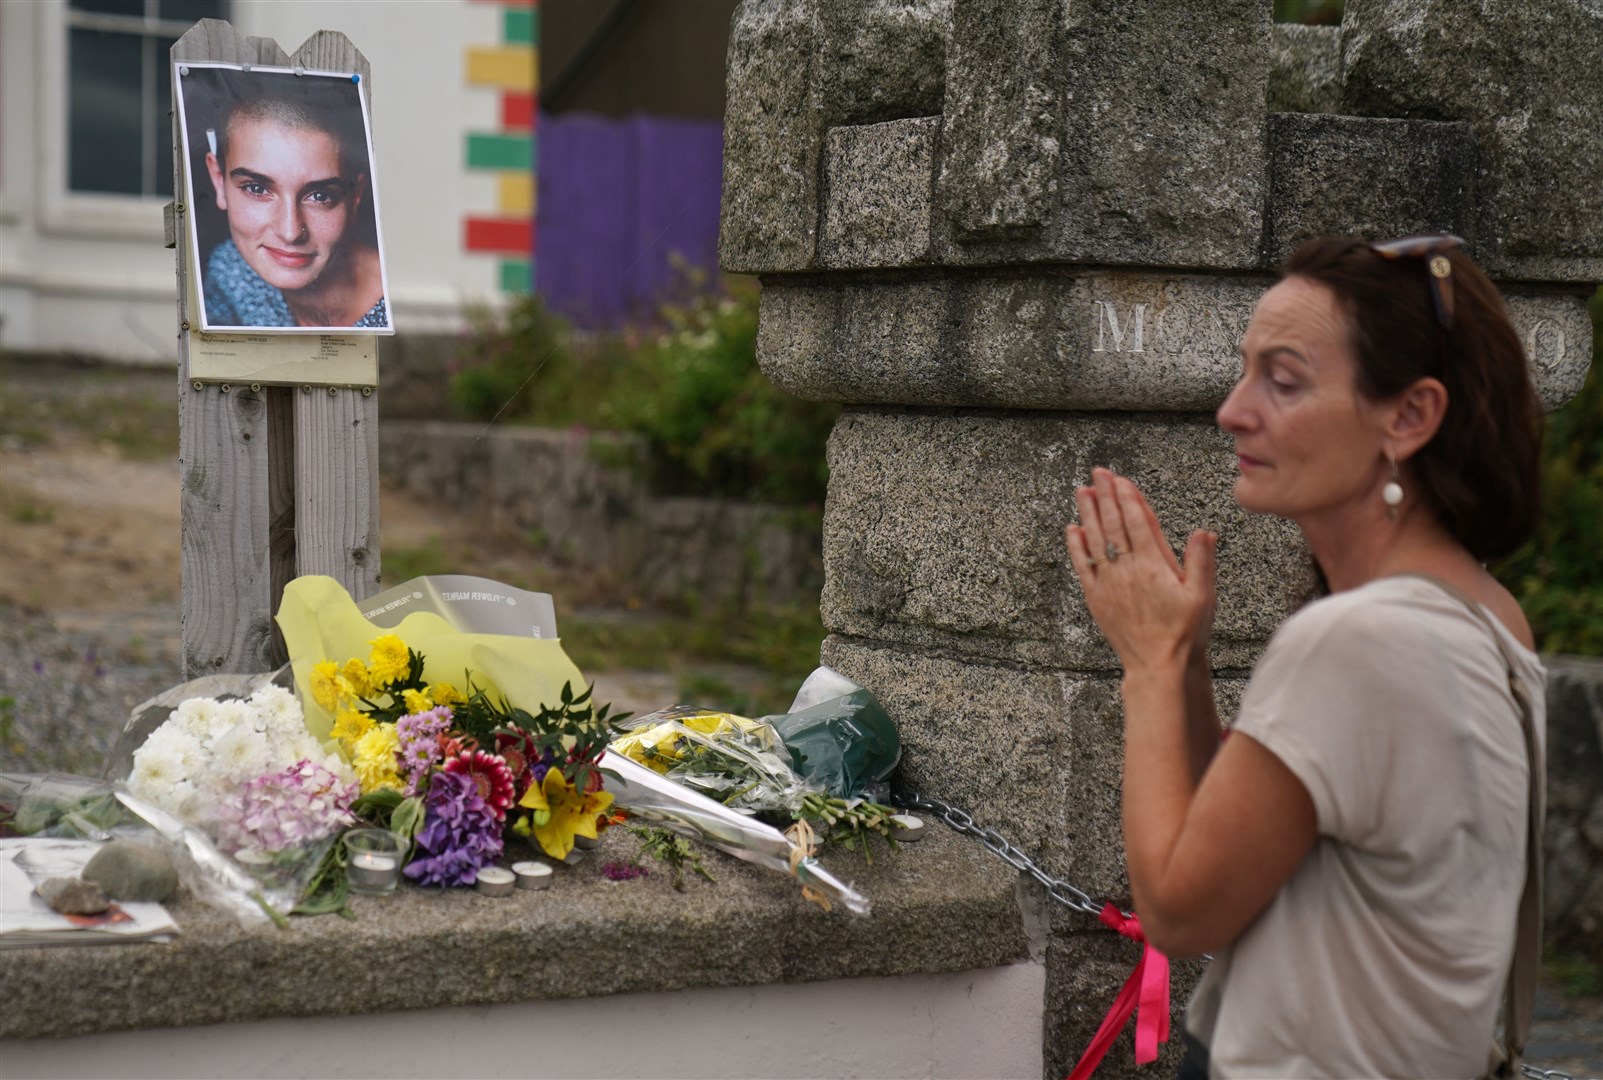 Olivia Galvin from Kerry holds her hands together in front of floral tributes laid outside Sinead O’Connor’s former home in Bray (Brian Lawless/PA)